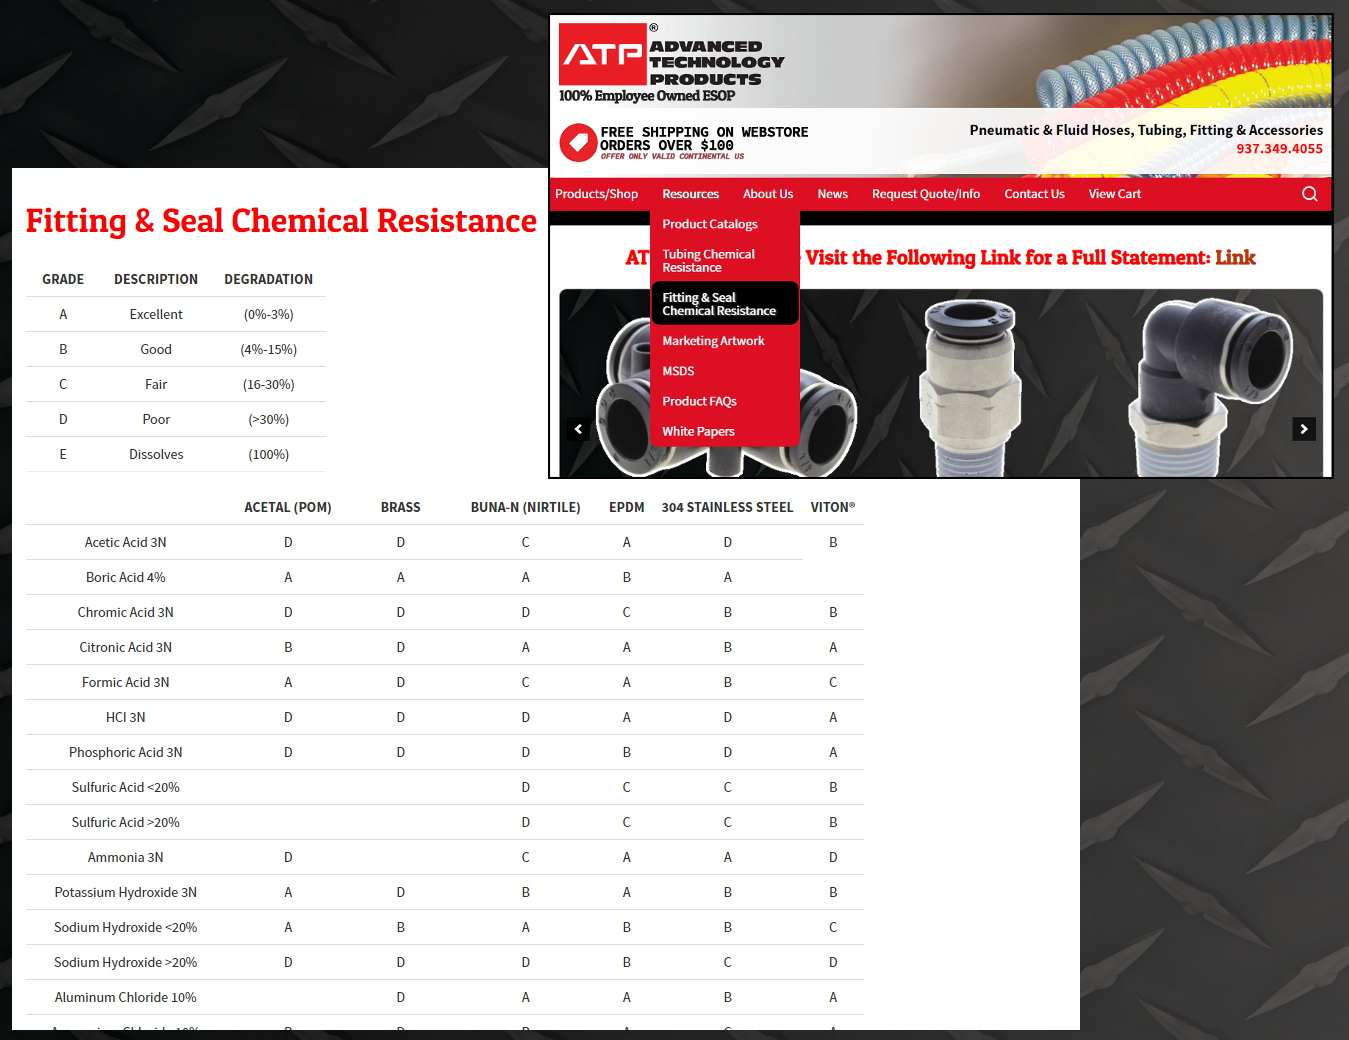 Now Live: Fitting & Seal Chemical Resistance